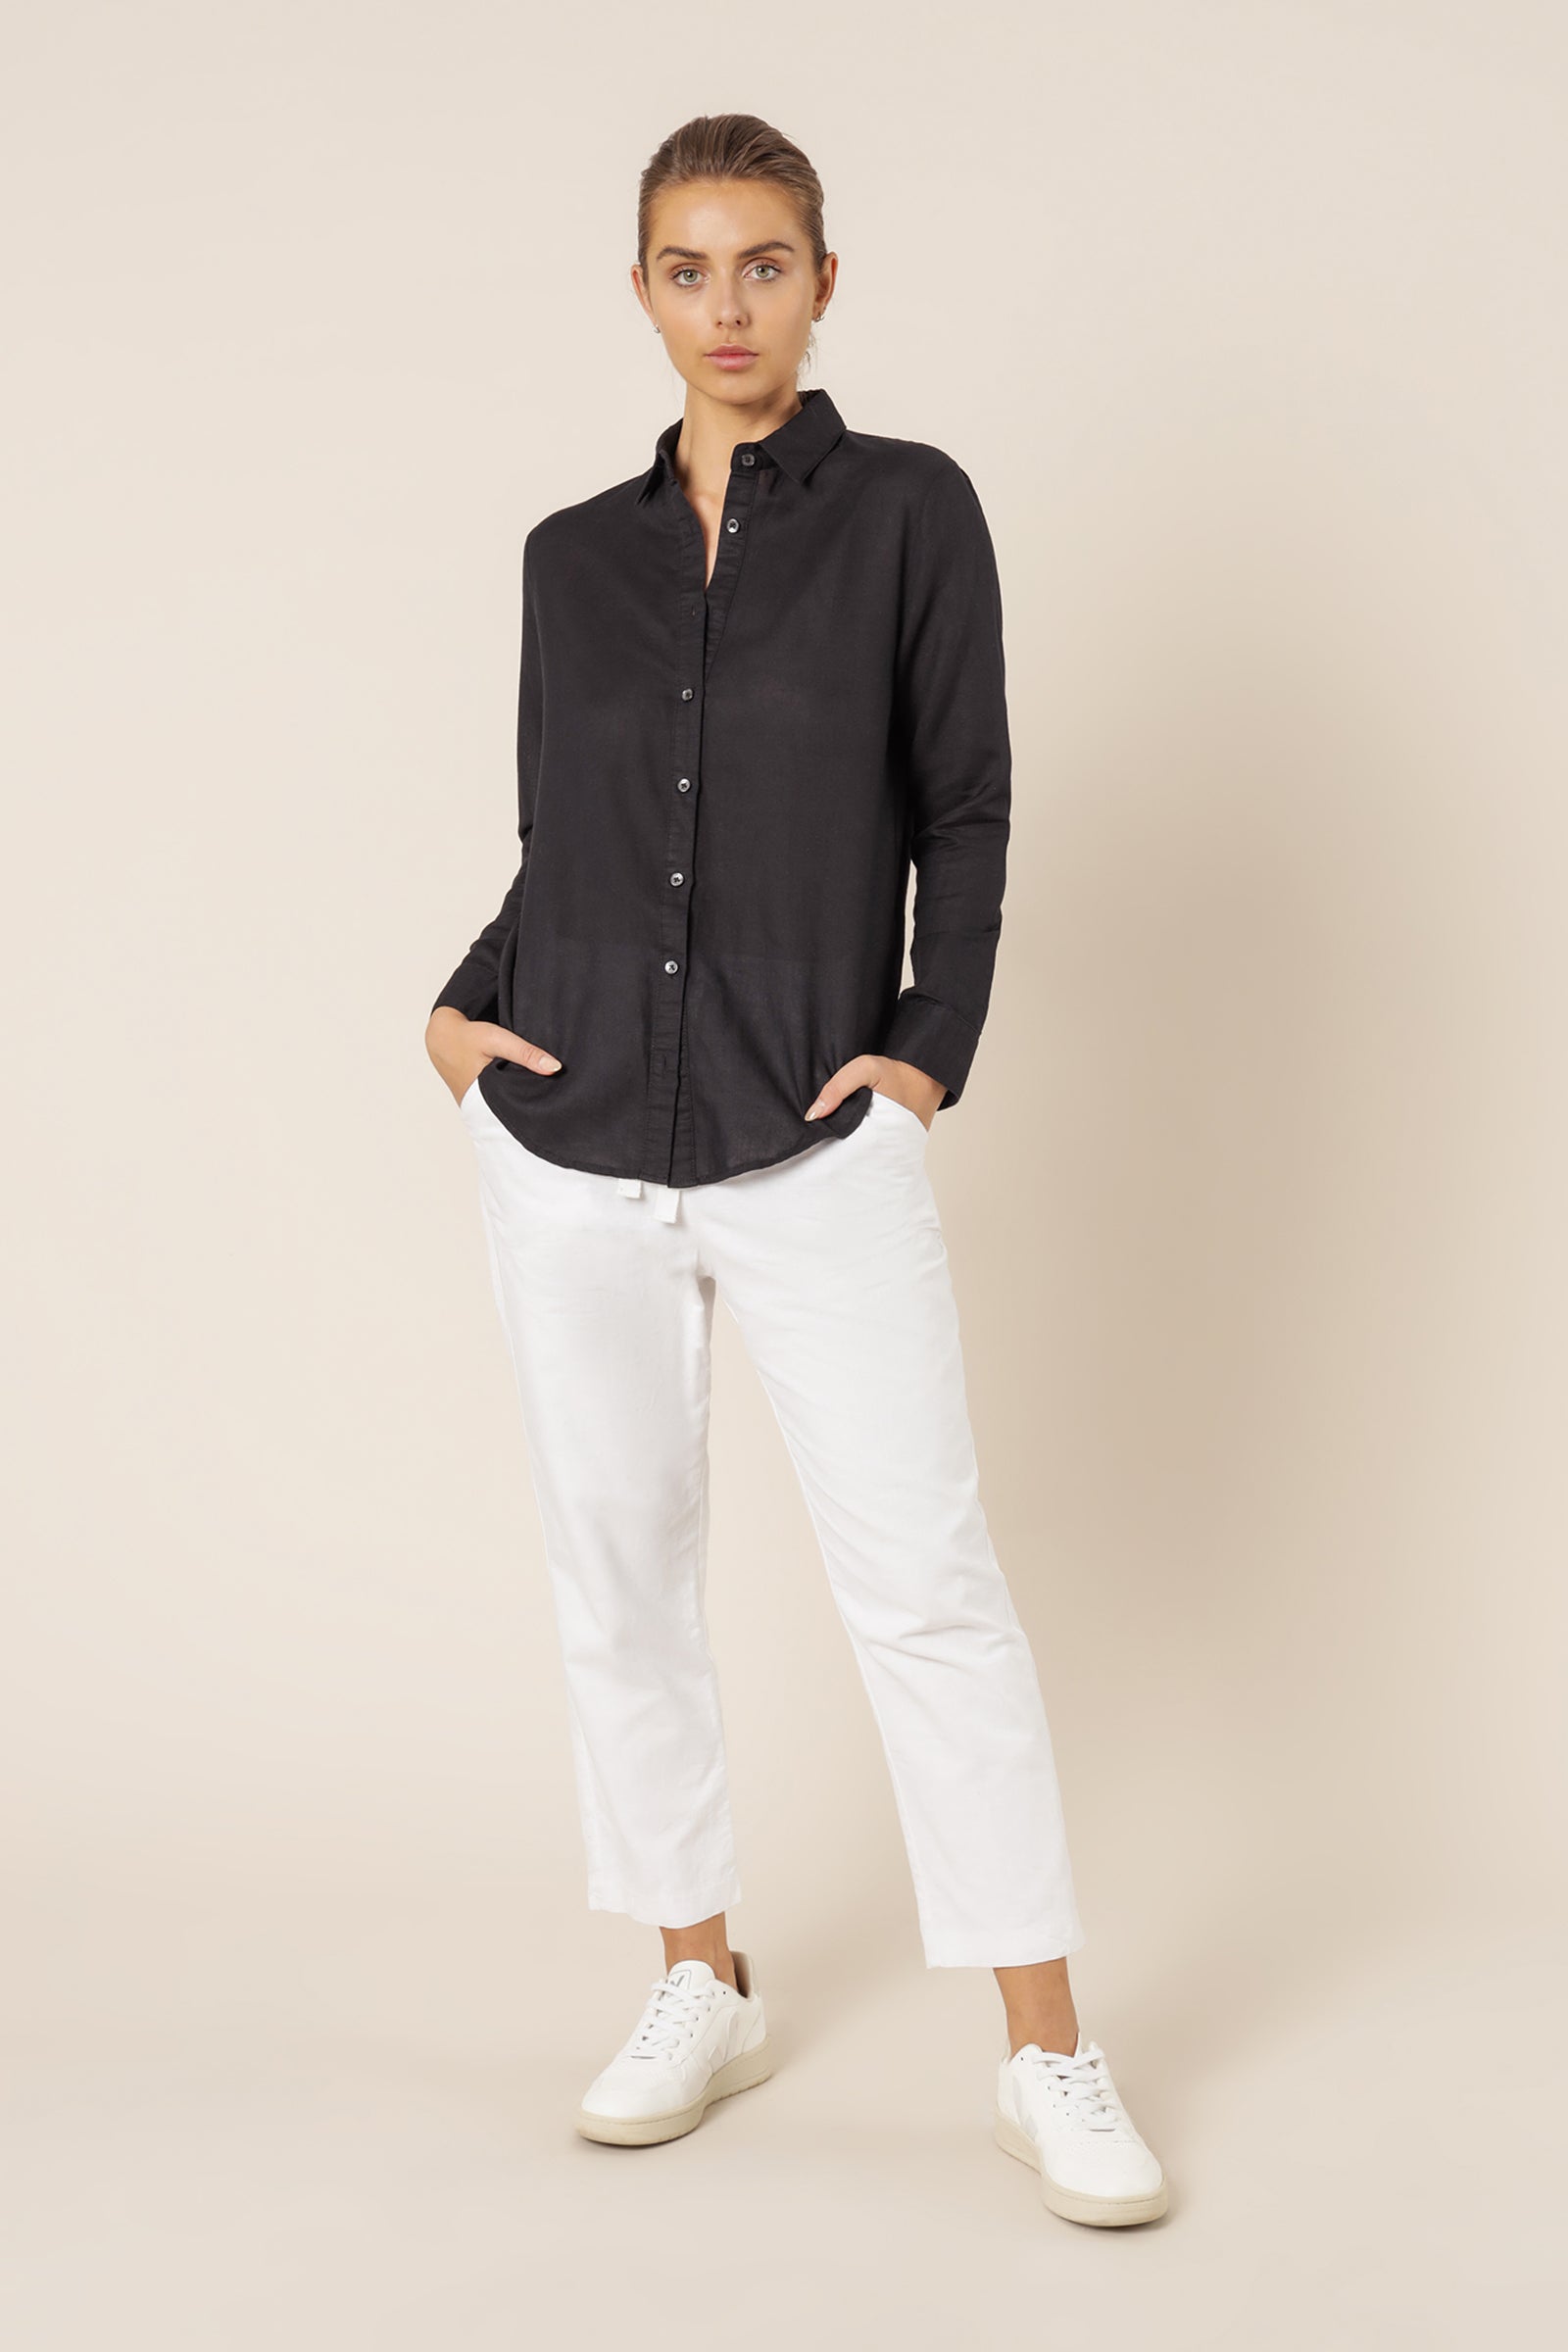 Nude Lucy nude classic shirt black top